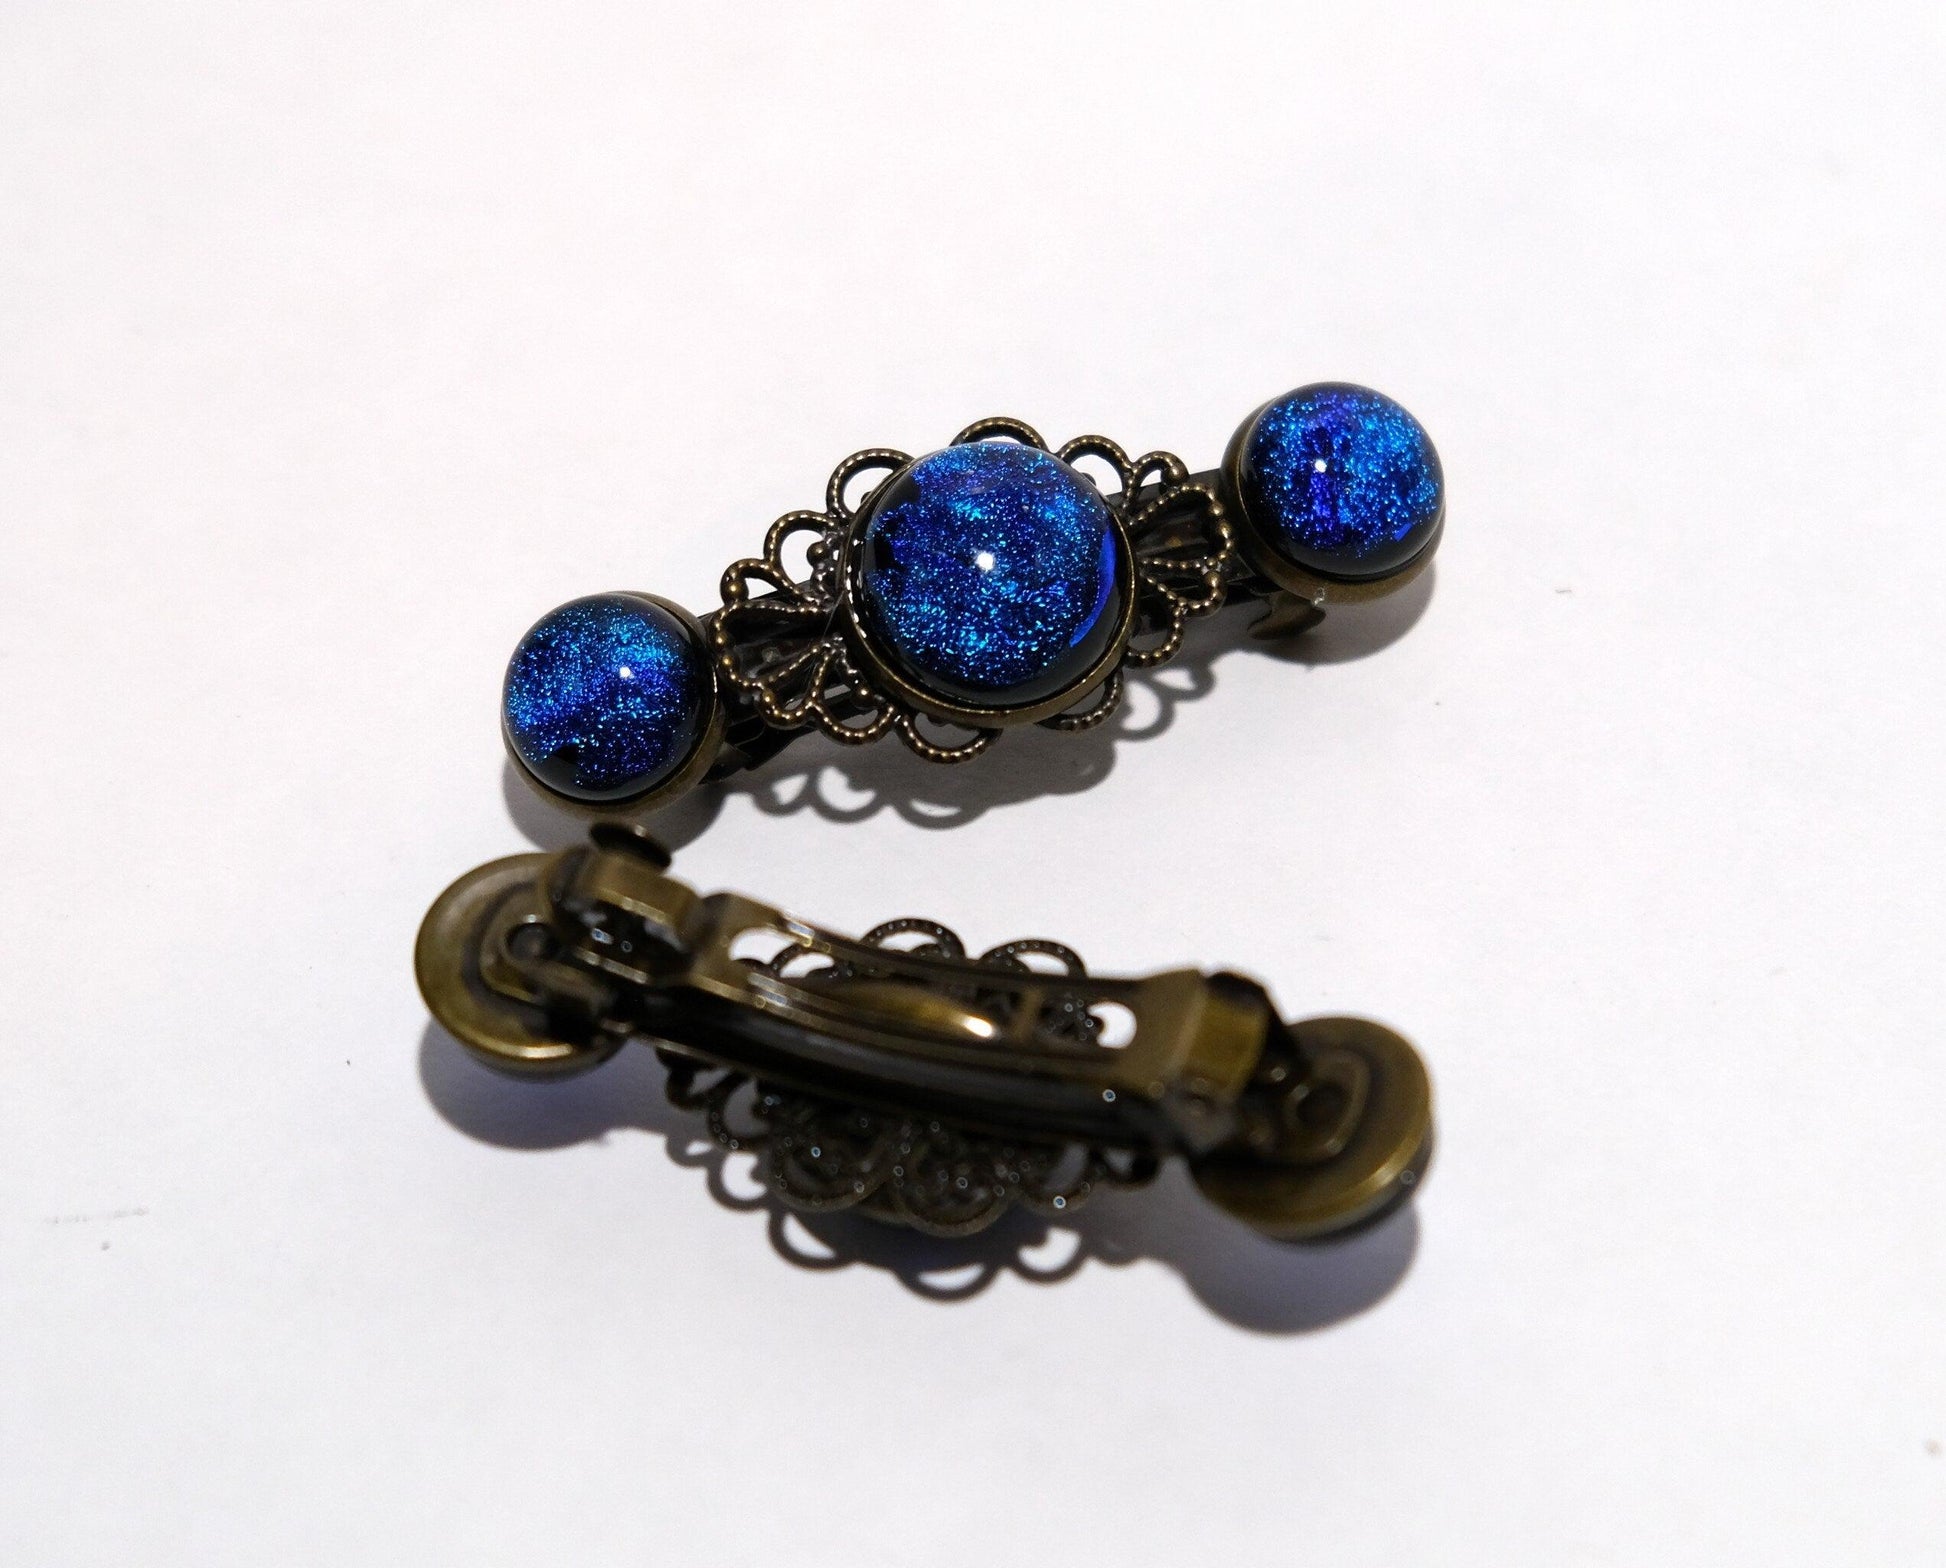 Barrette pair, bronze flowers with blue dichroic fused glass cabochons, french clip, 2 1/4 inches seedsglassworks seeds glassworks